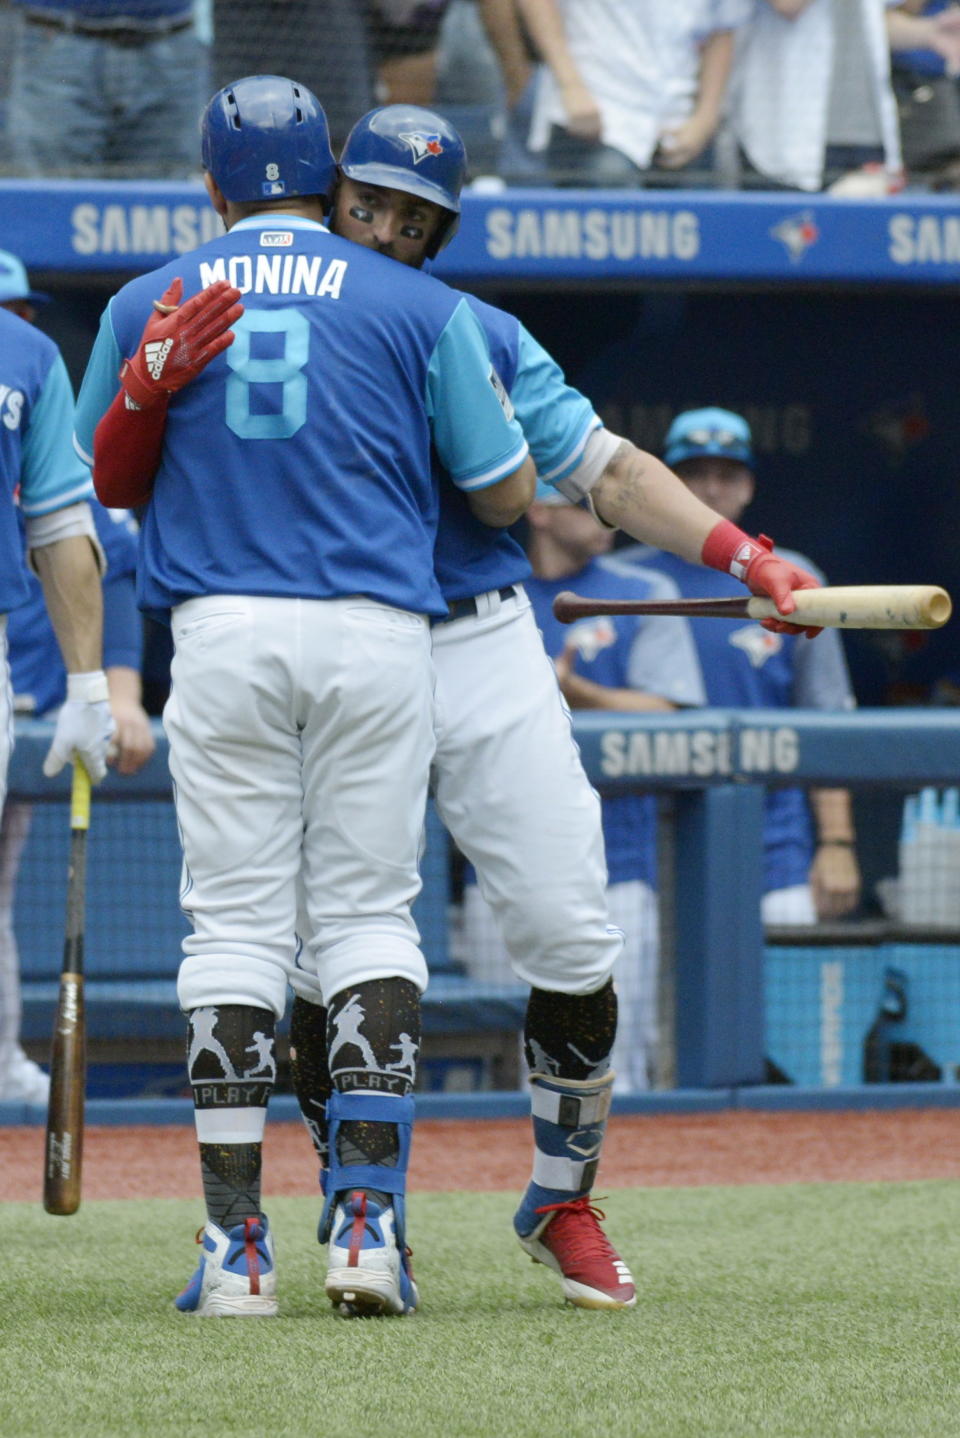 Toronto Blue Jays Kendrys Morales (8) celebrates with teammate Kevin Pillar after hitting a two-run home run against the Philadelphia Phillies during the third inning of a baseball game, Sunday, Aug. 26, 2018 in Toronto. (Jon Blacker/The Canadian Press via AP)